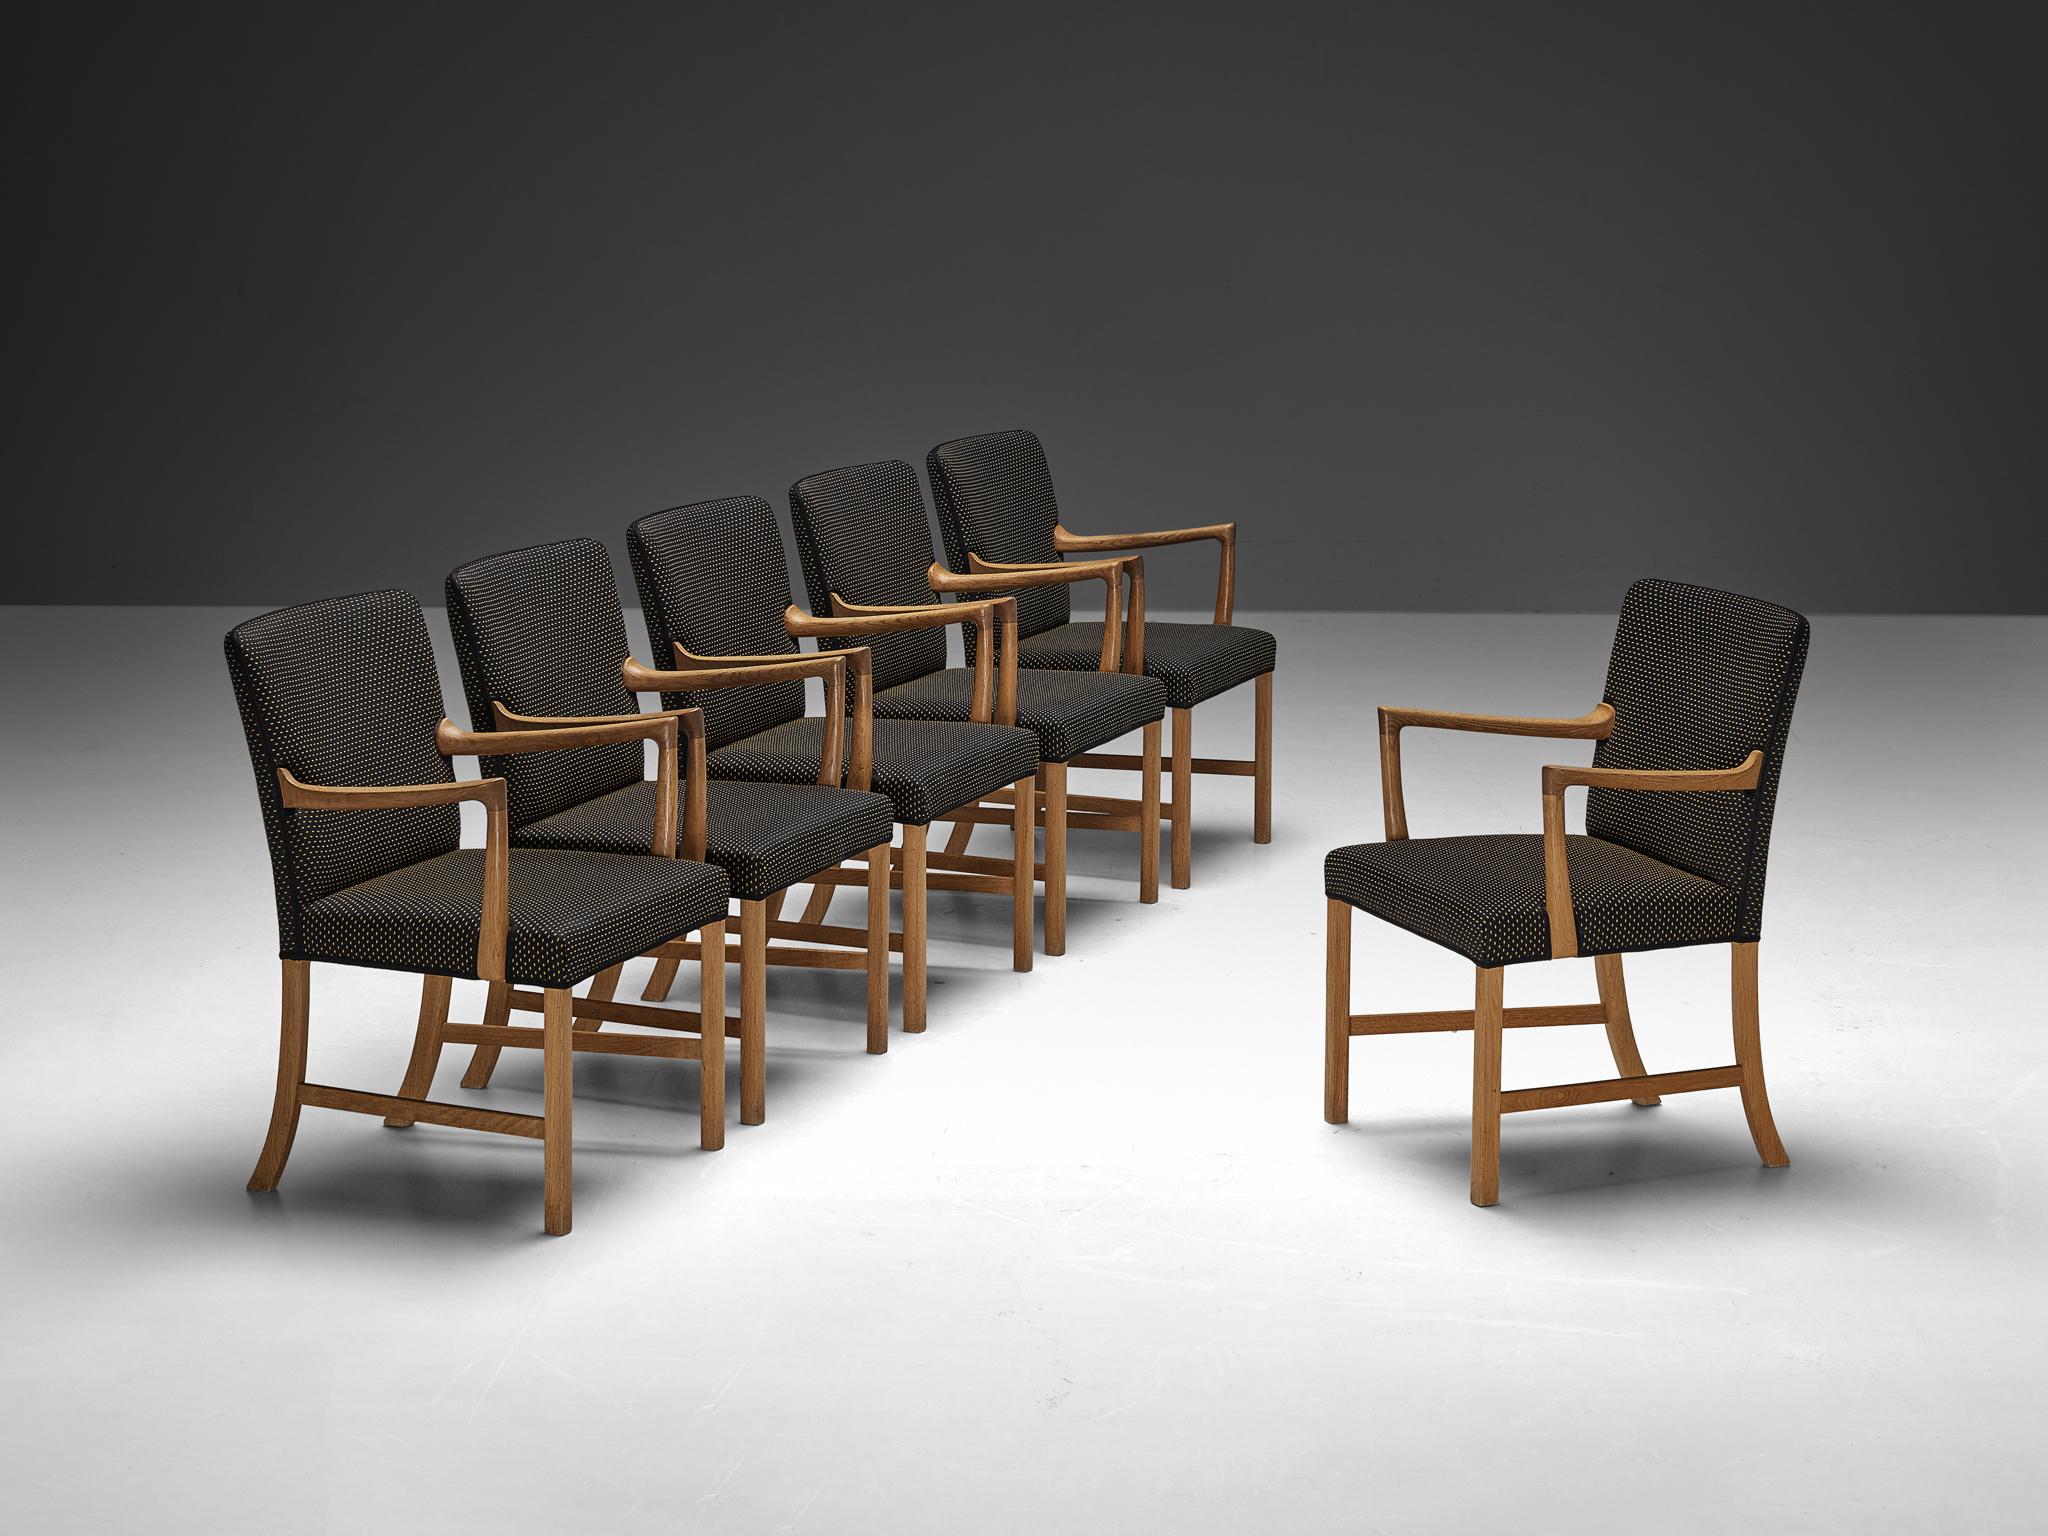 Ole Wanscher for A.J. Iversen, set of six armchairs, model 'J3063', oak, fabric, Denmark, 1960s

A rare set of mid-century dining chairs model J3063 crafted by Ole Wanscher. Drawing inspiration from an early 1944 design by the master for A.J.